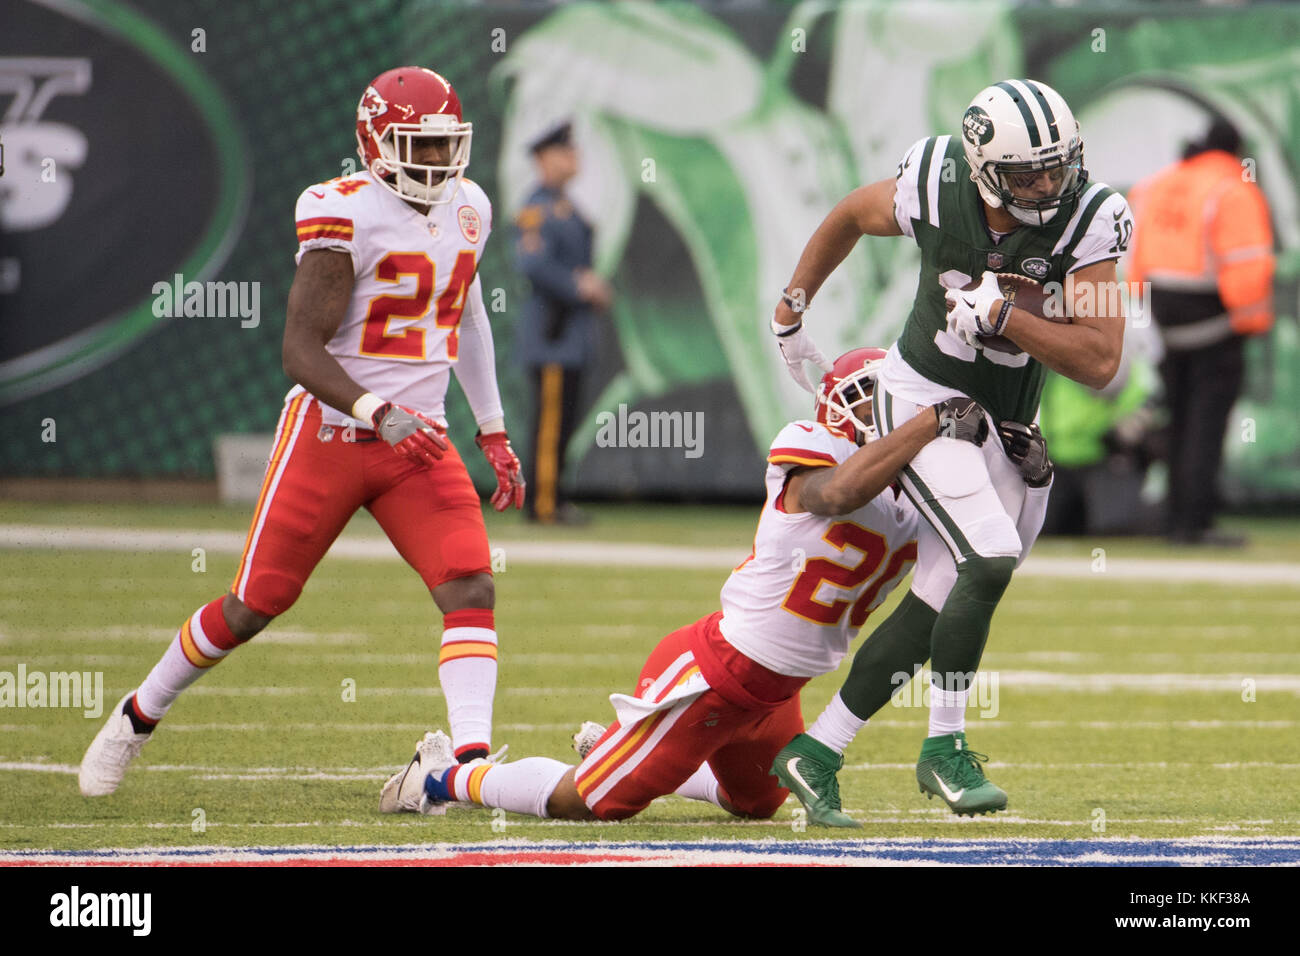 East Rutherford, New Jersey, USA. 3rd Dec, 2017. New York Jets wide receiver Jermaine Kearse (10) runs after the catch as Kansas City Chiefs cornerback Steven Nelson (20) tries to drag him down with cornerback Darrelle Revis (24) behind him during the NFL game between the Kansas City Chiefs and the New York Jets at MetLife Stadium in East Rutherford, New Jersey. Christopher Szagola/CSM/Alamy Live News Stock Photo